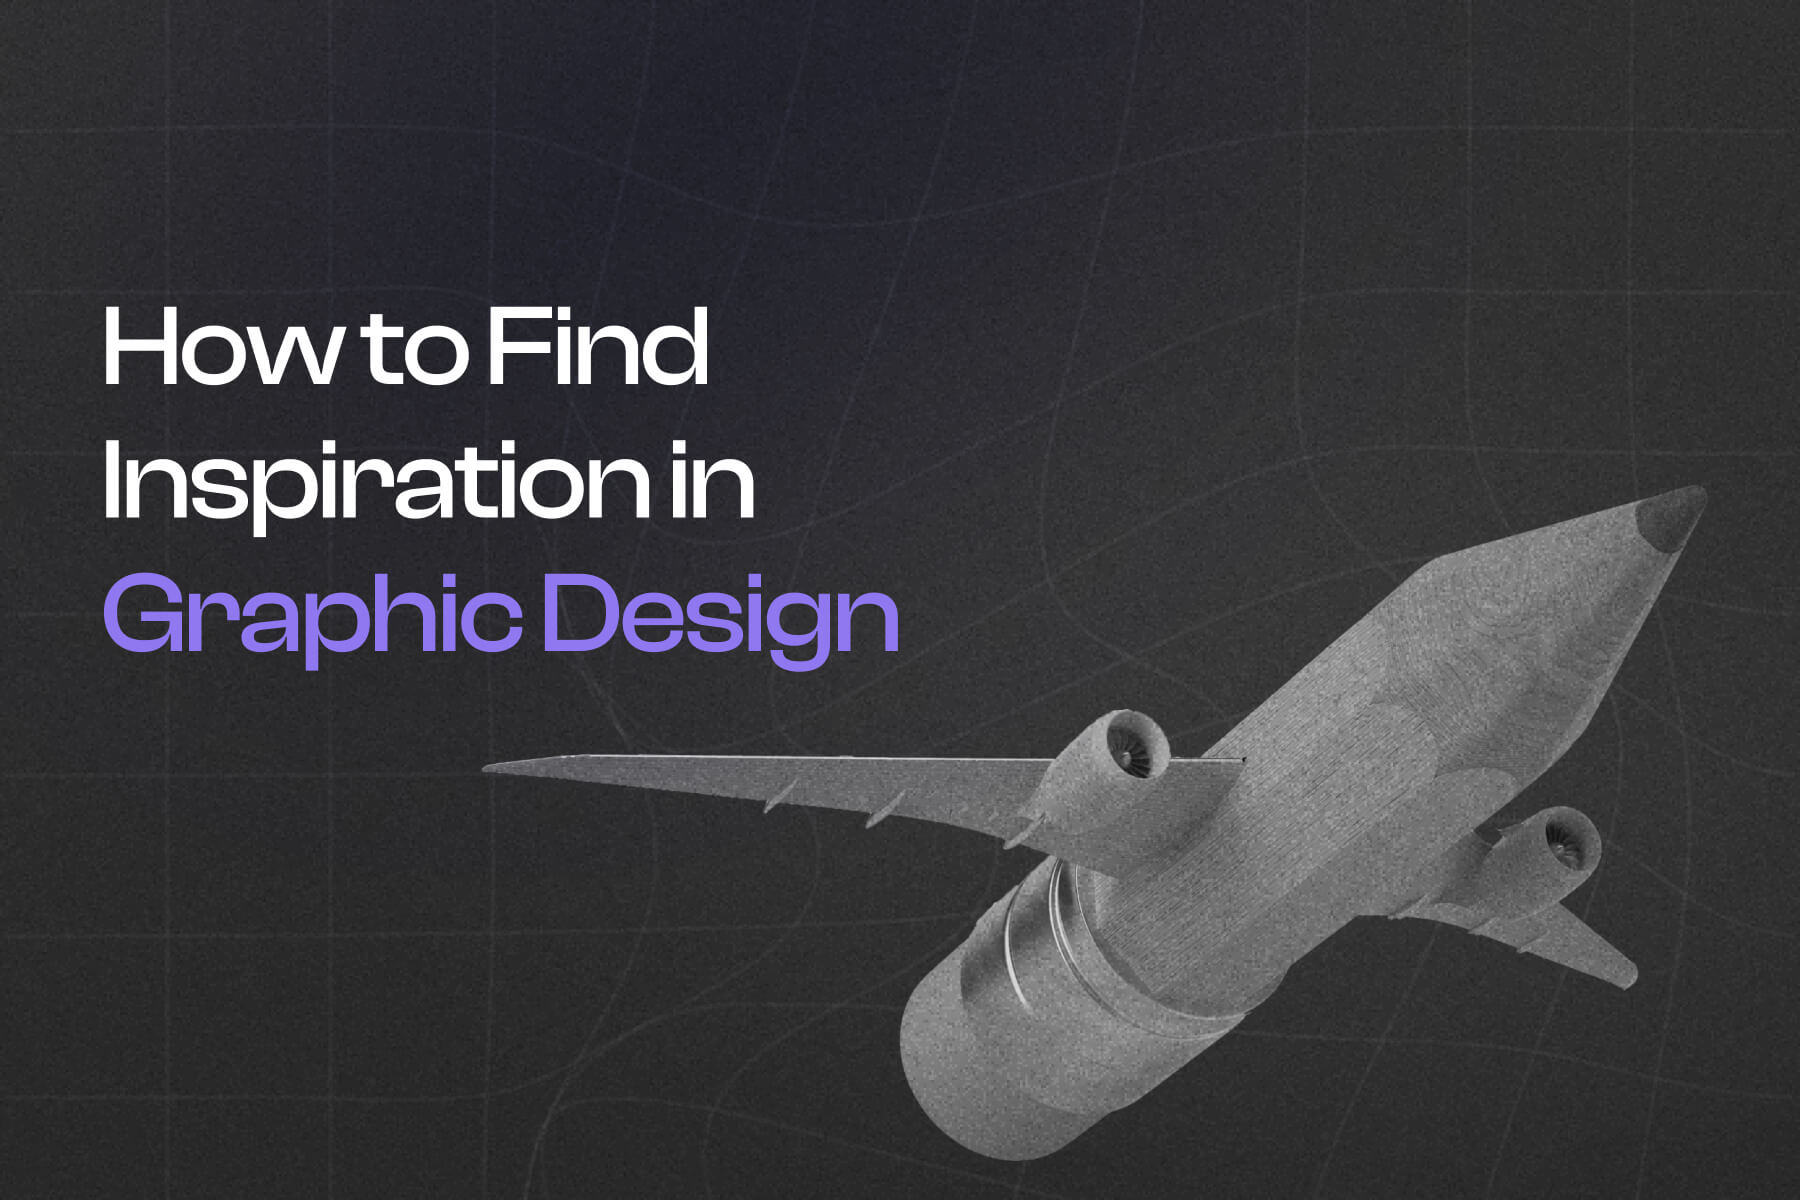 How to Find Inspiration in Graphic Design